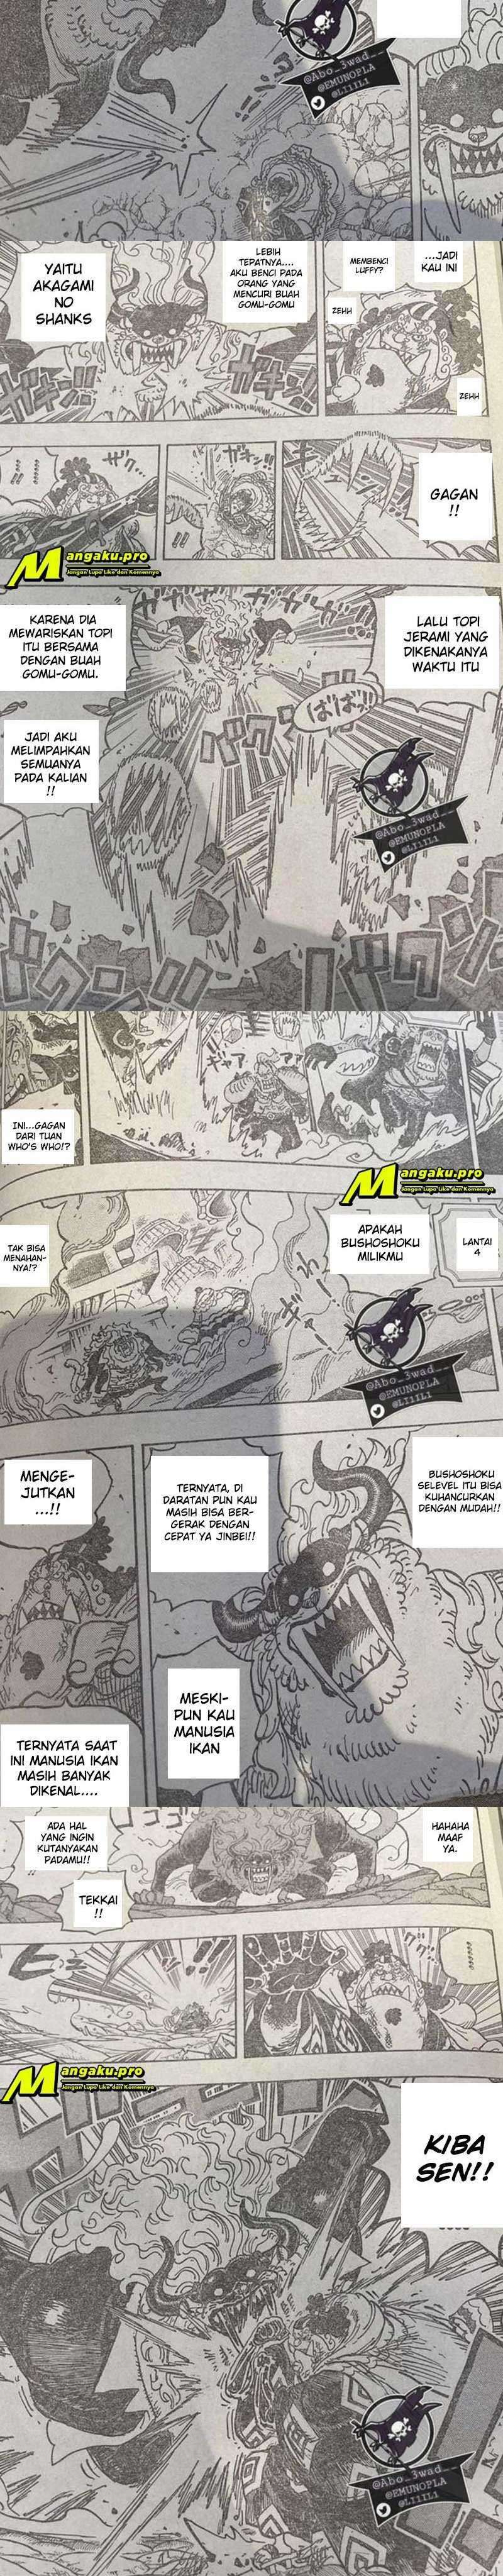 One Piece Chapter 1018 Lq - 41